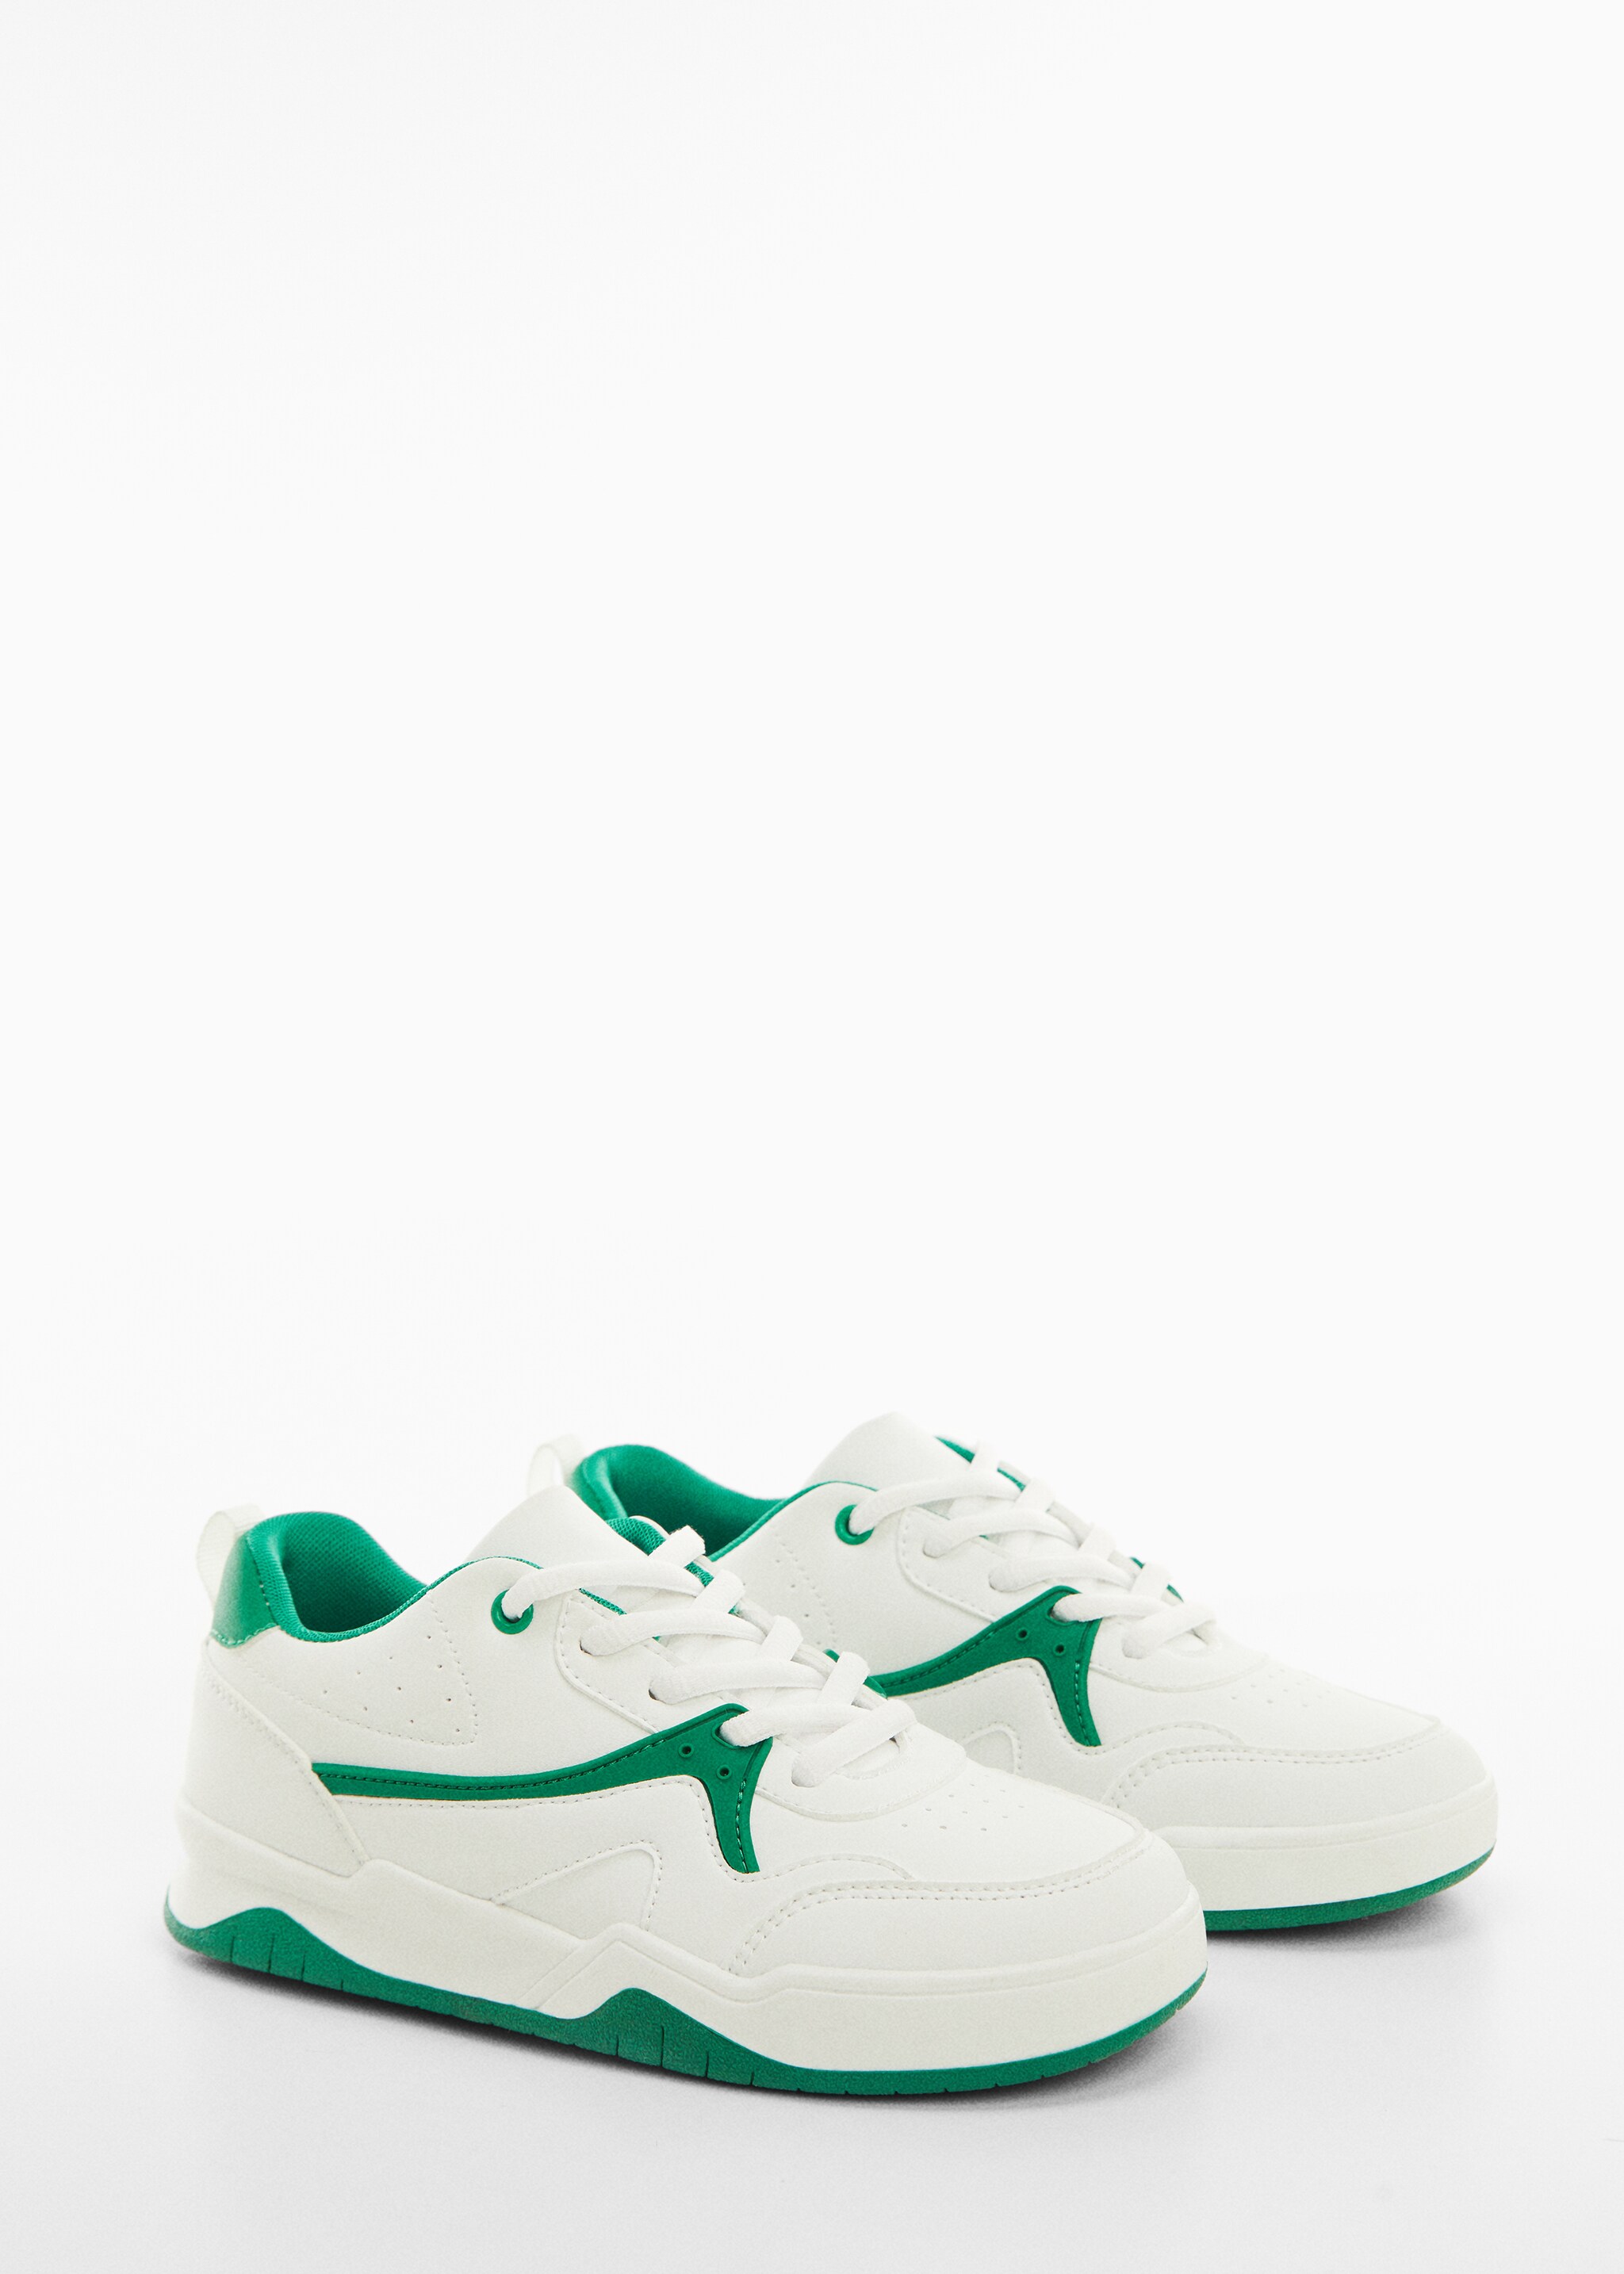 Lace-up mixed sneakers - Medium plane